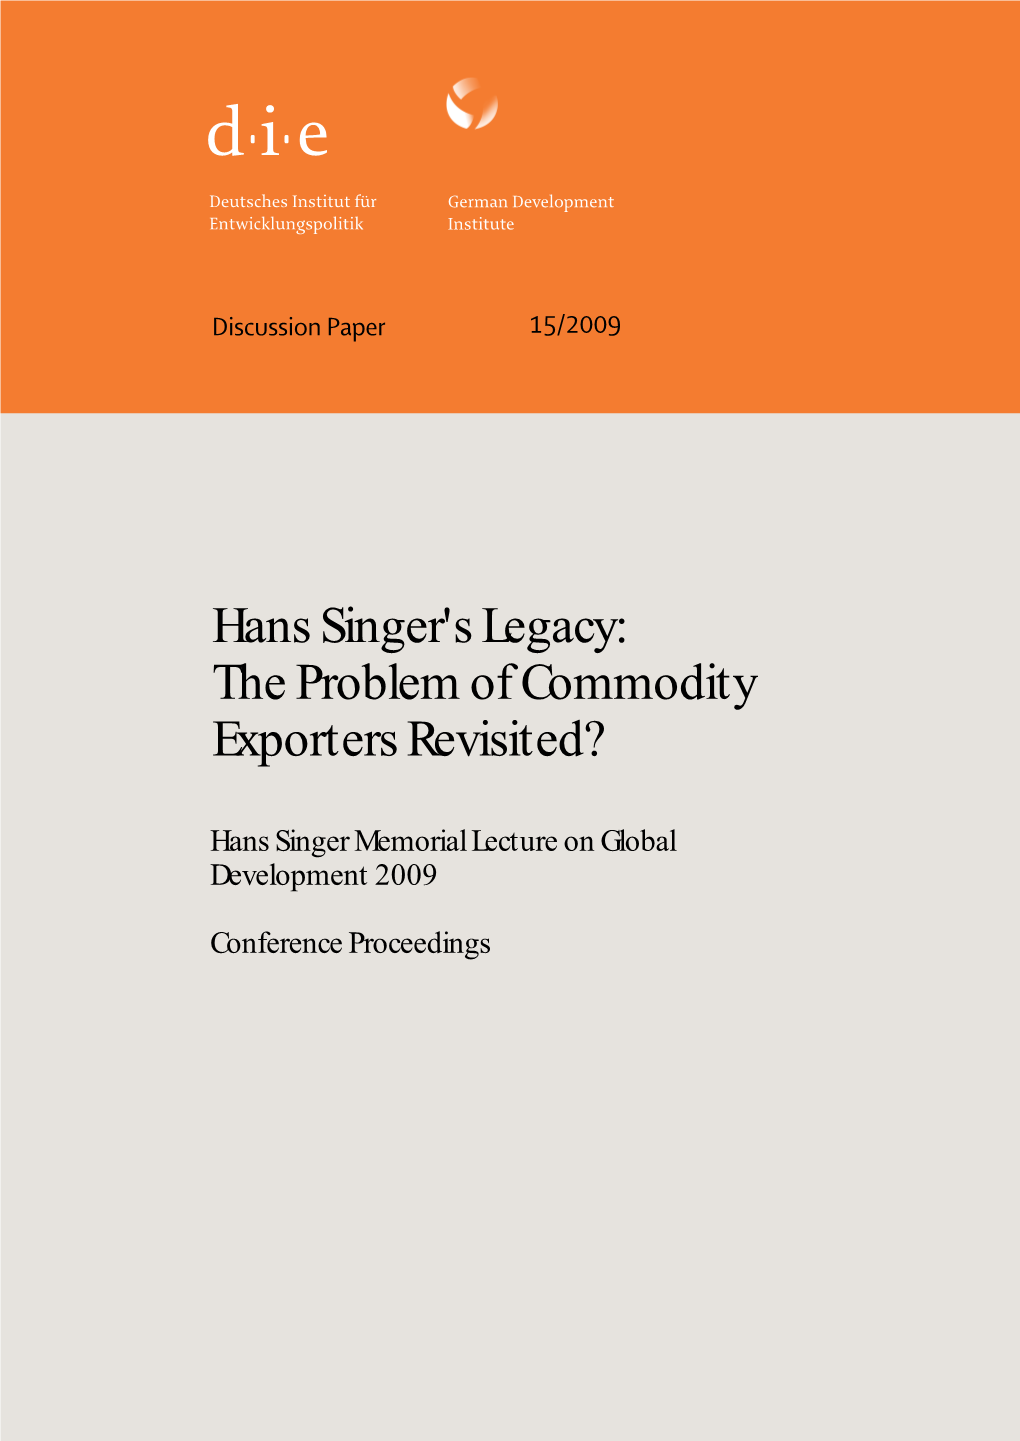 Hans Singer's Legacy: the Problem of Commodity Exporters Revisited Prof